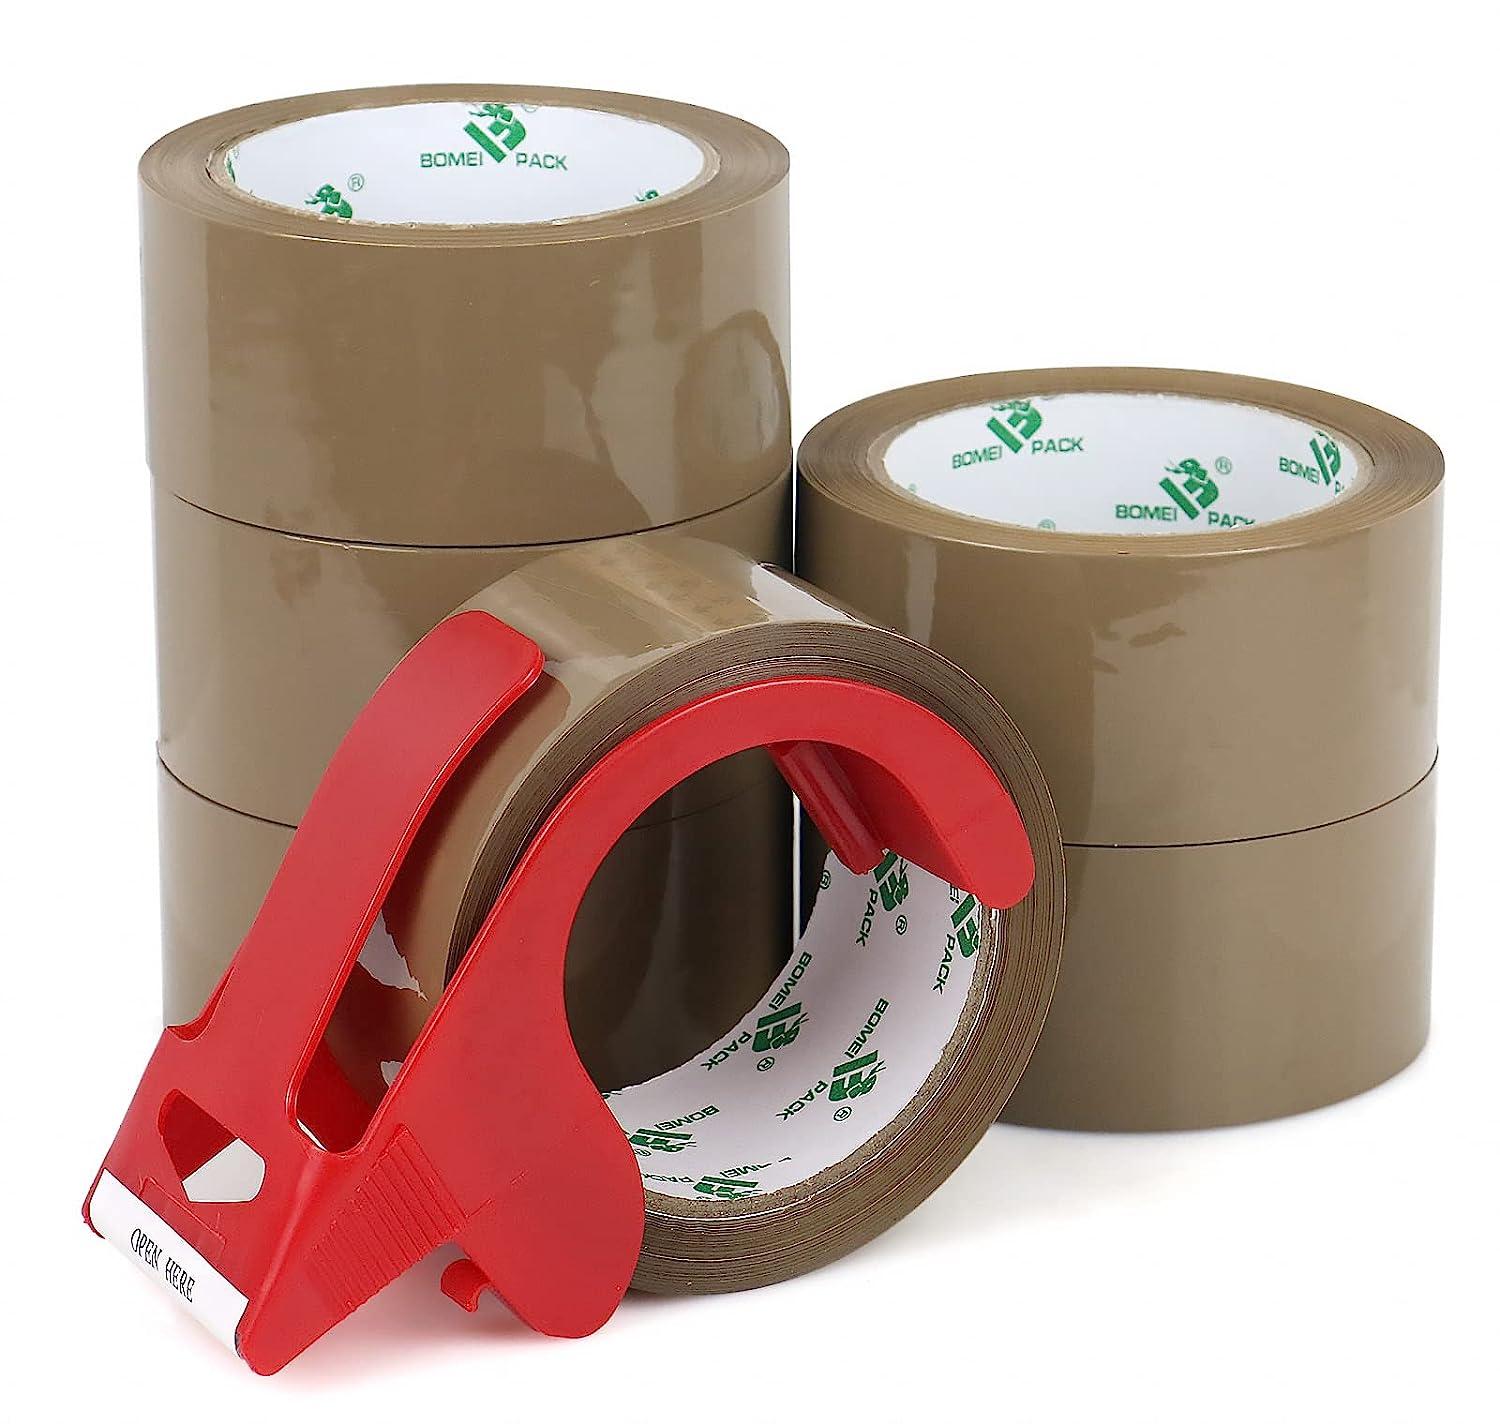 bomei pack brown packing tape with dispenser 2 4 mil 1 88 inch x 60 yards 6 refills rolls packaging tape for